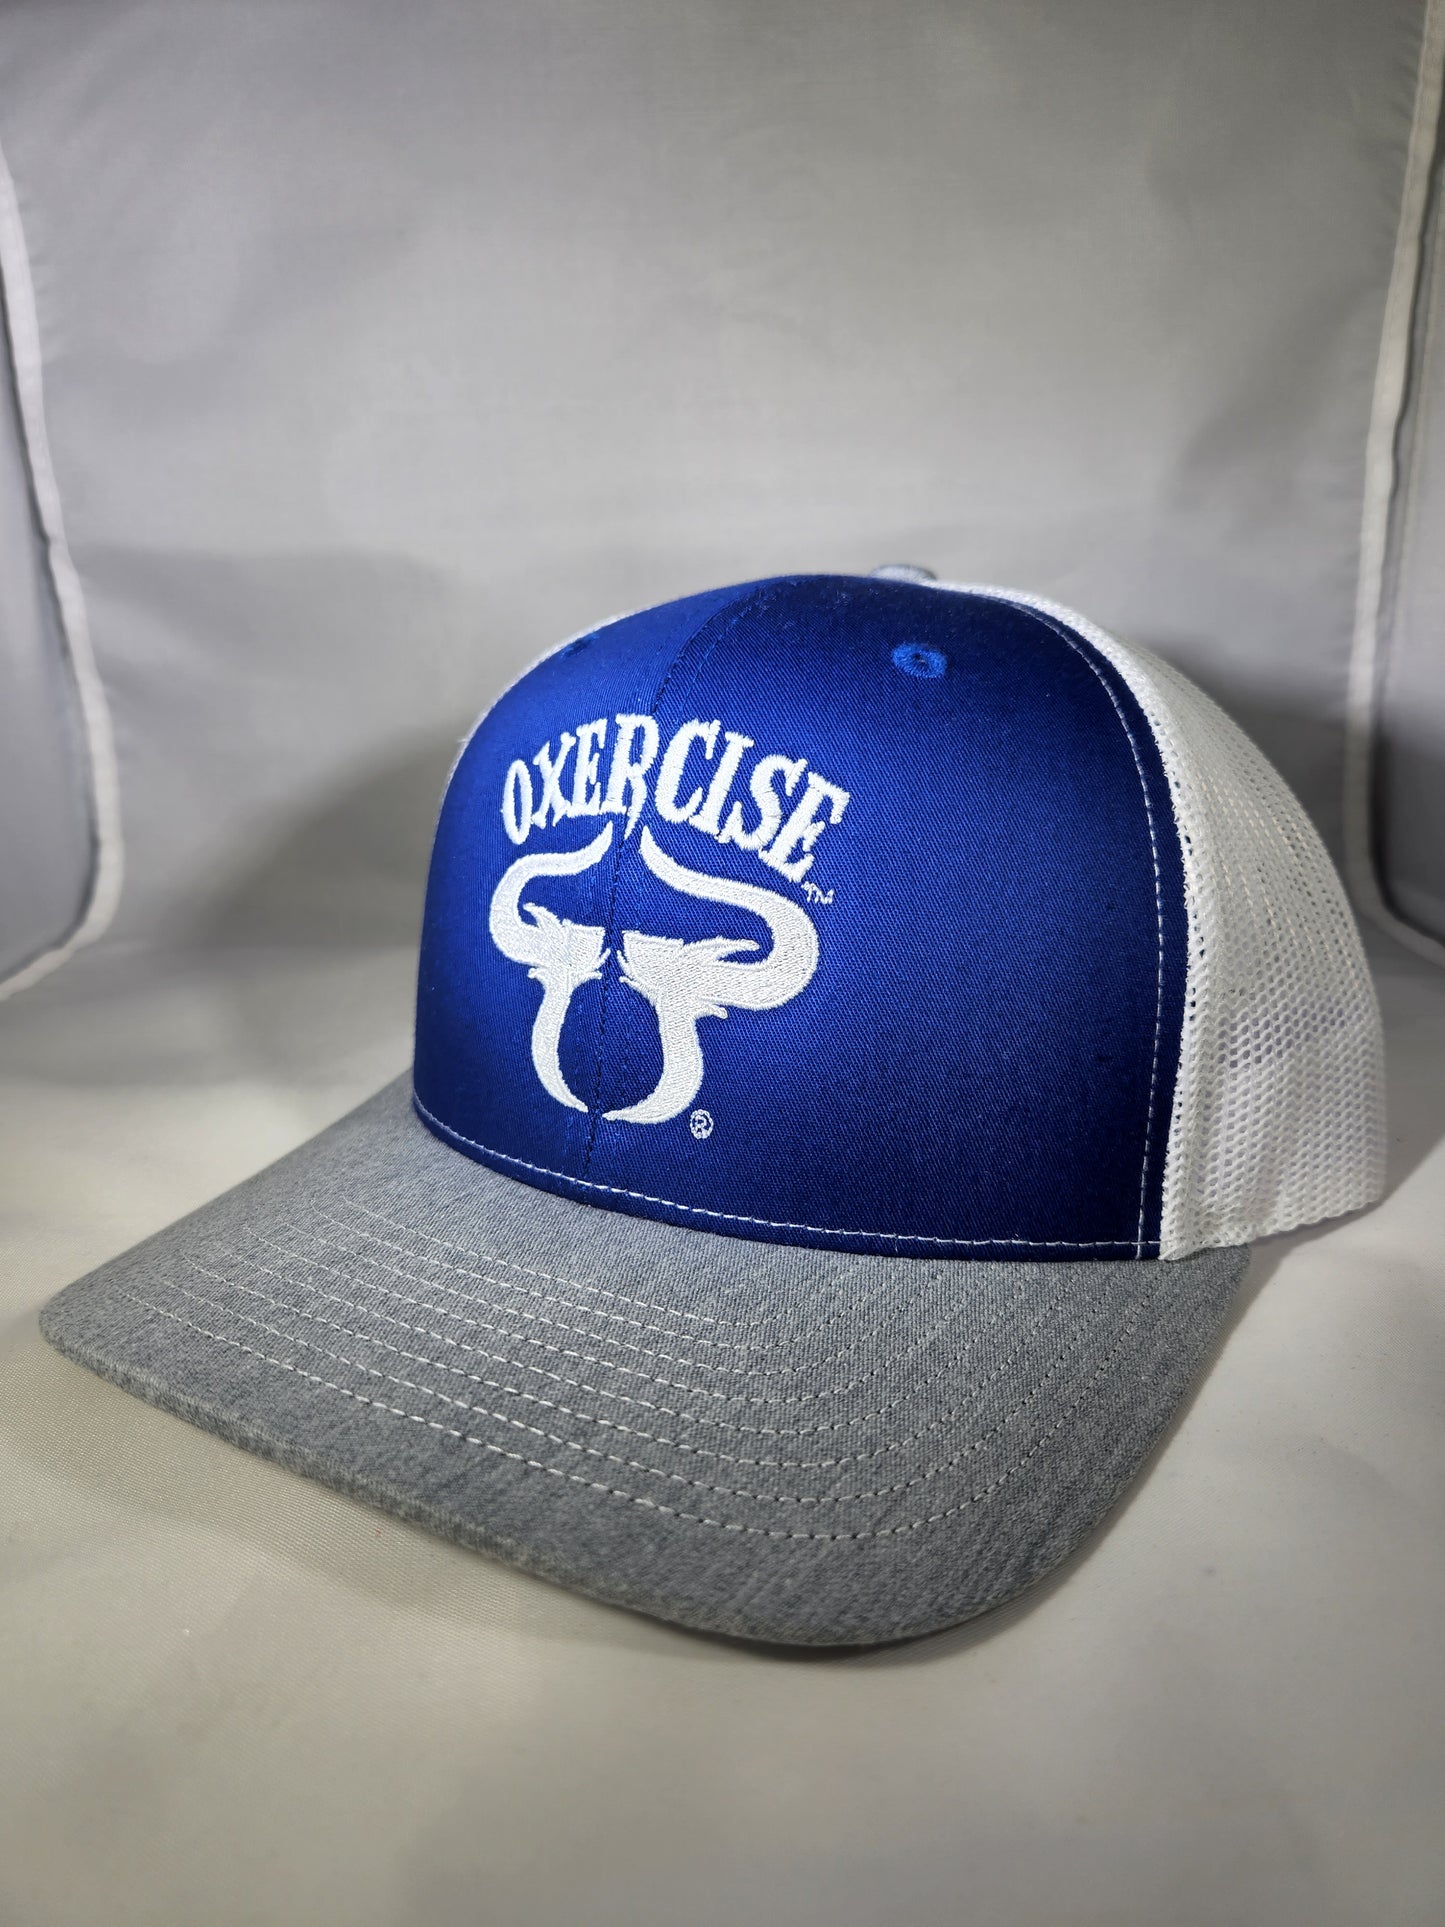 Oxercise Cap with Center Logo